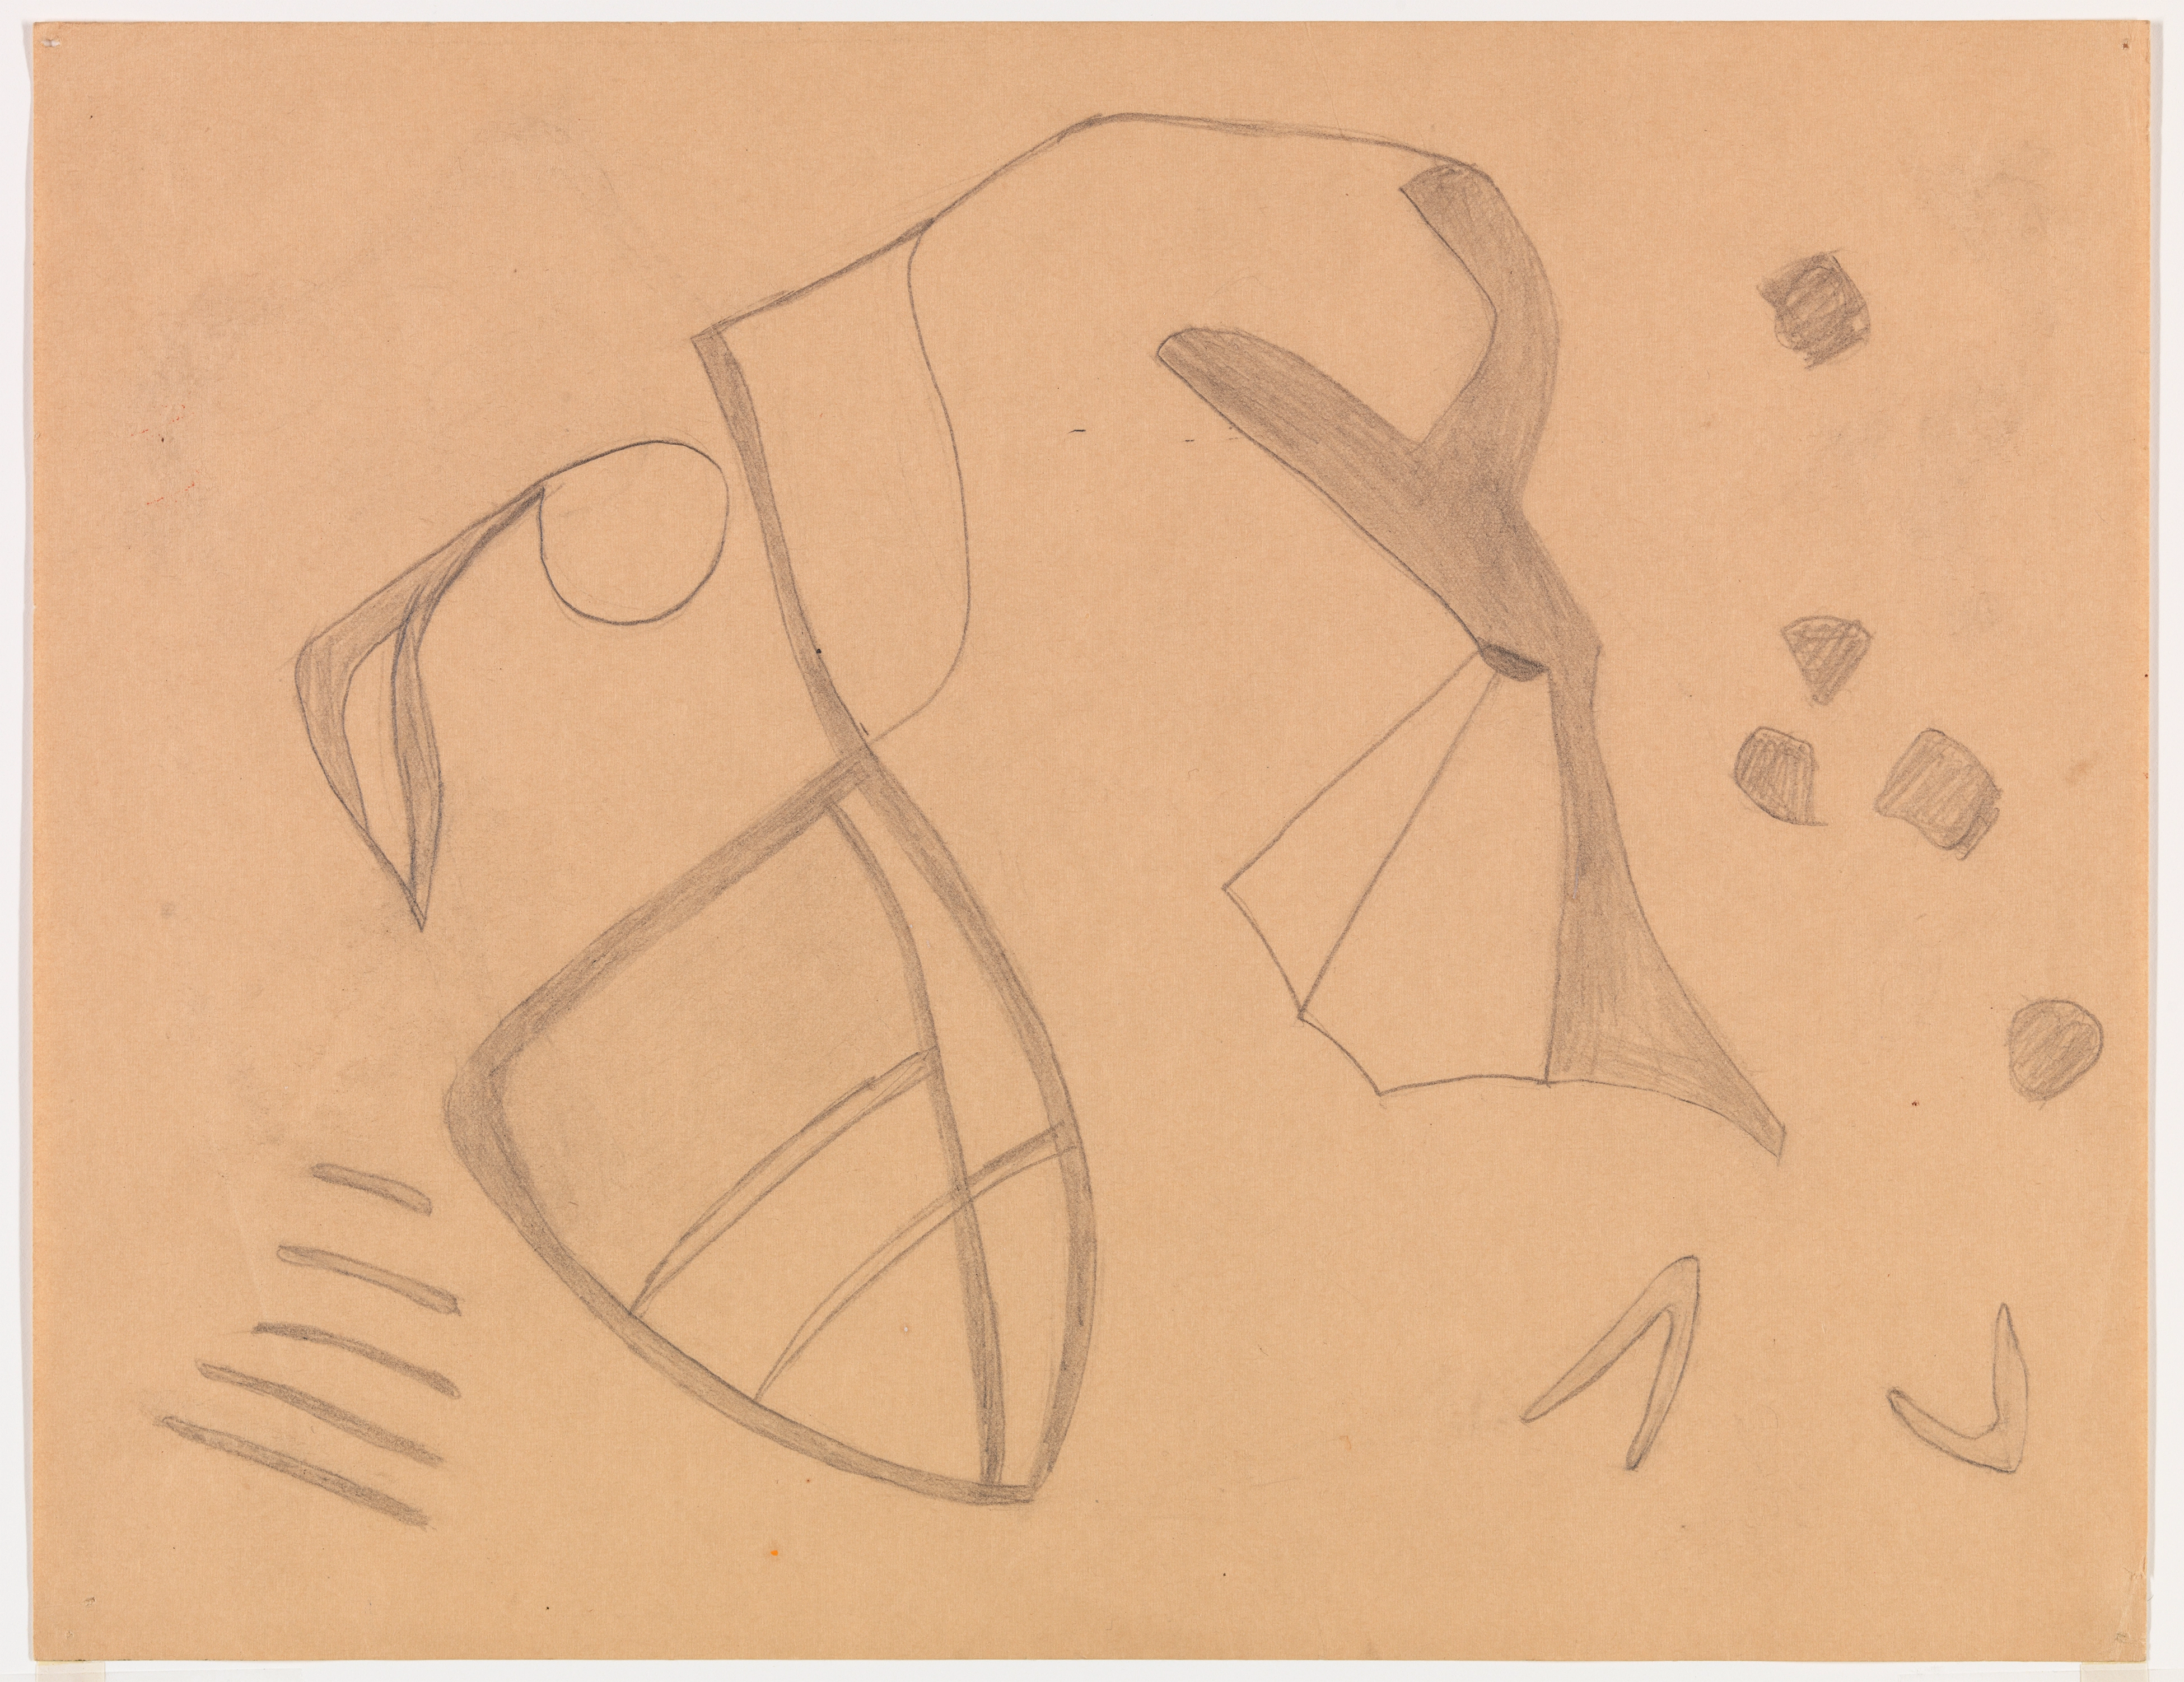 Abstract pencil drawing on sepia-toned paper of linear and biomorphic forms.